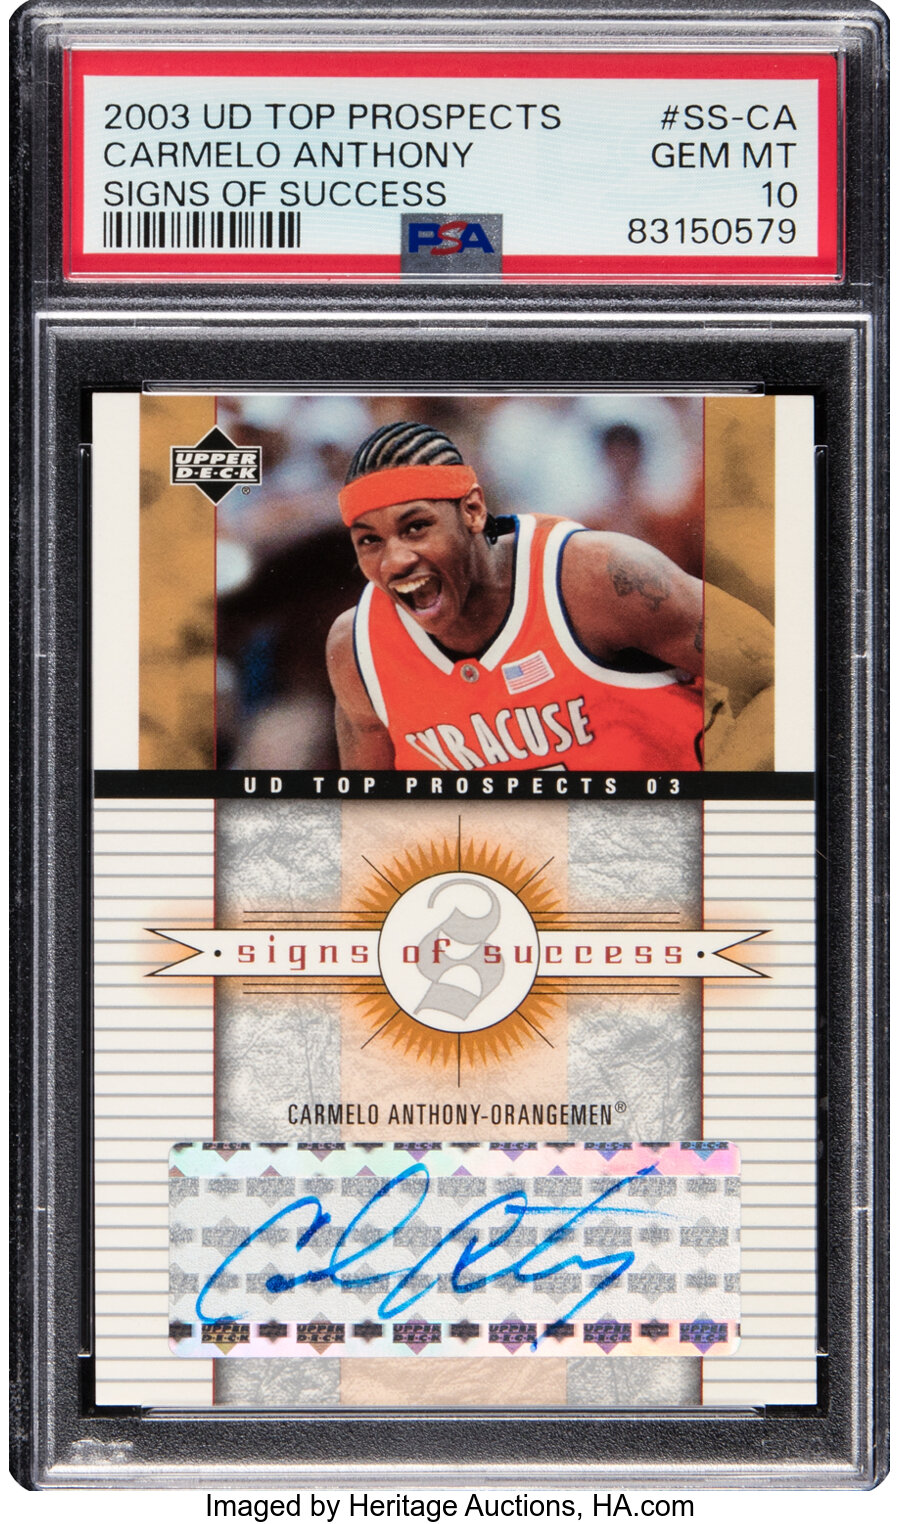 2003 UD Top Prospects Carmelo Anthony (Signs of Success Autograph) #SS-CA PSA Gem Mint 10